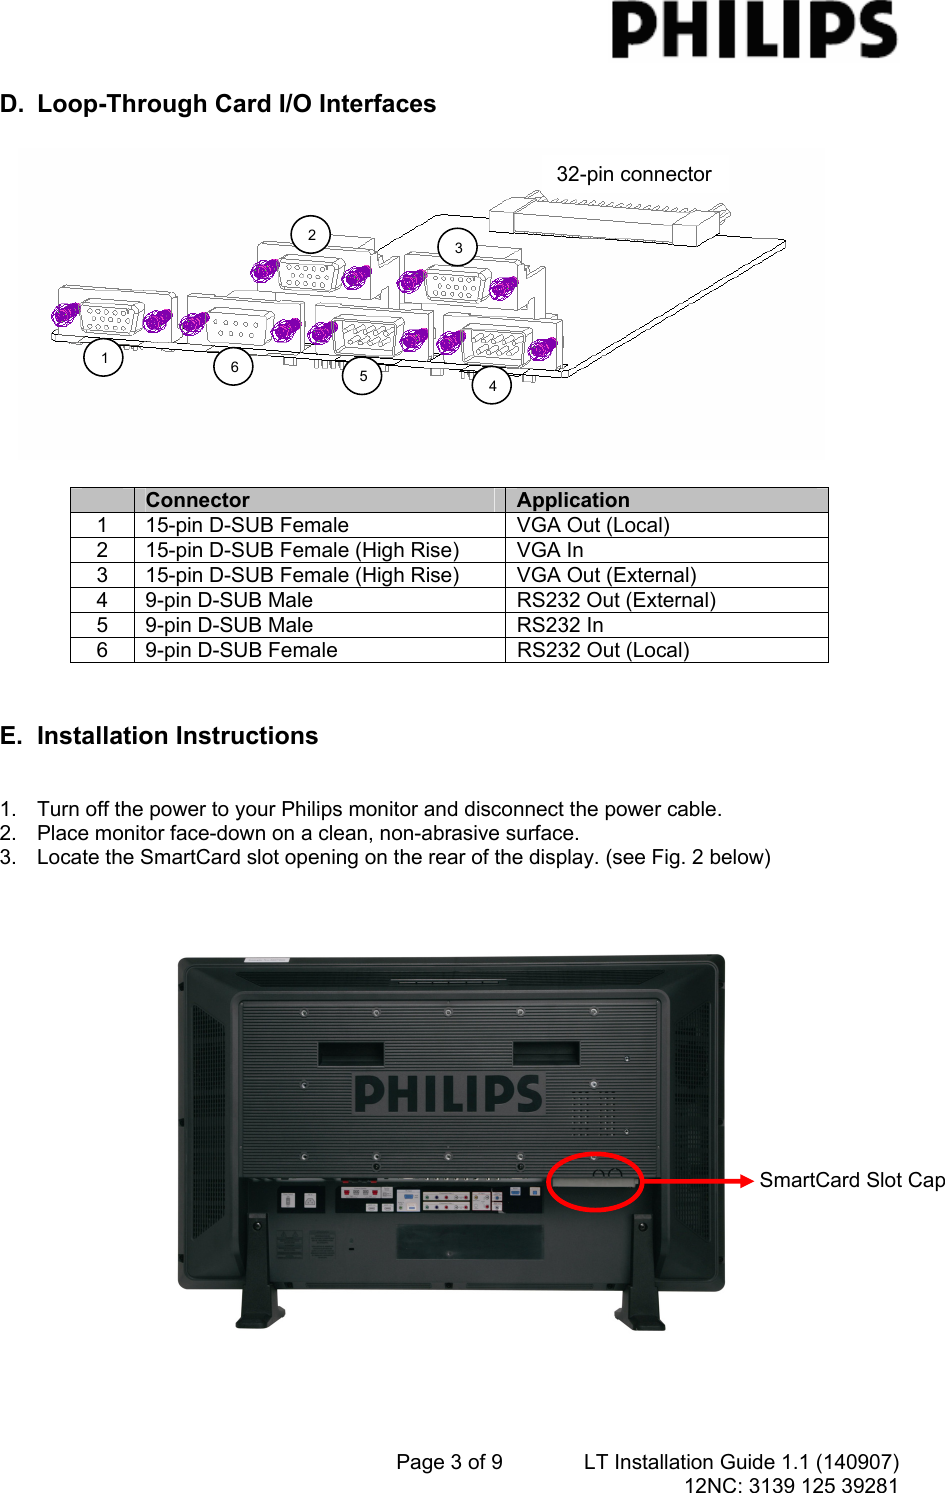 Page 3 of 9 - Philips Philips-Cra01-00-Owner-S-Manual Installation Guide For NetX